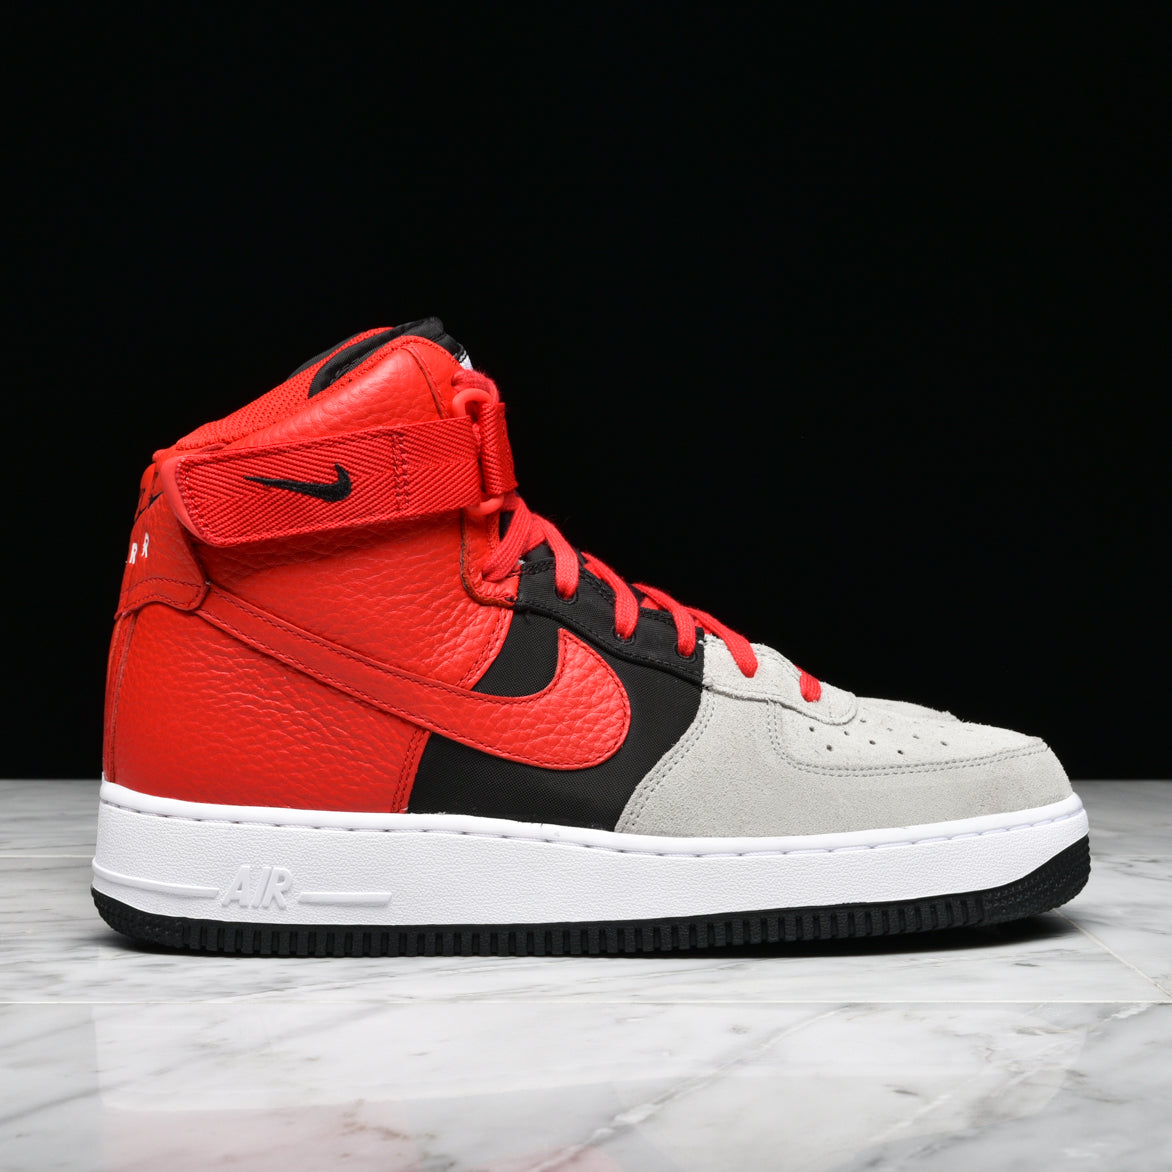 red and black nike air force 1 lv8 high 